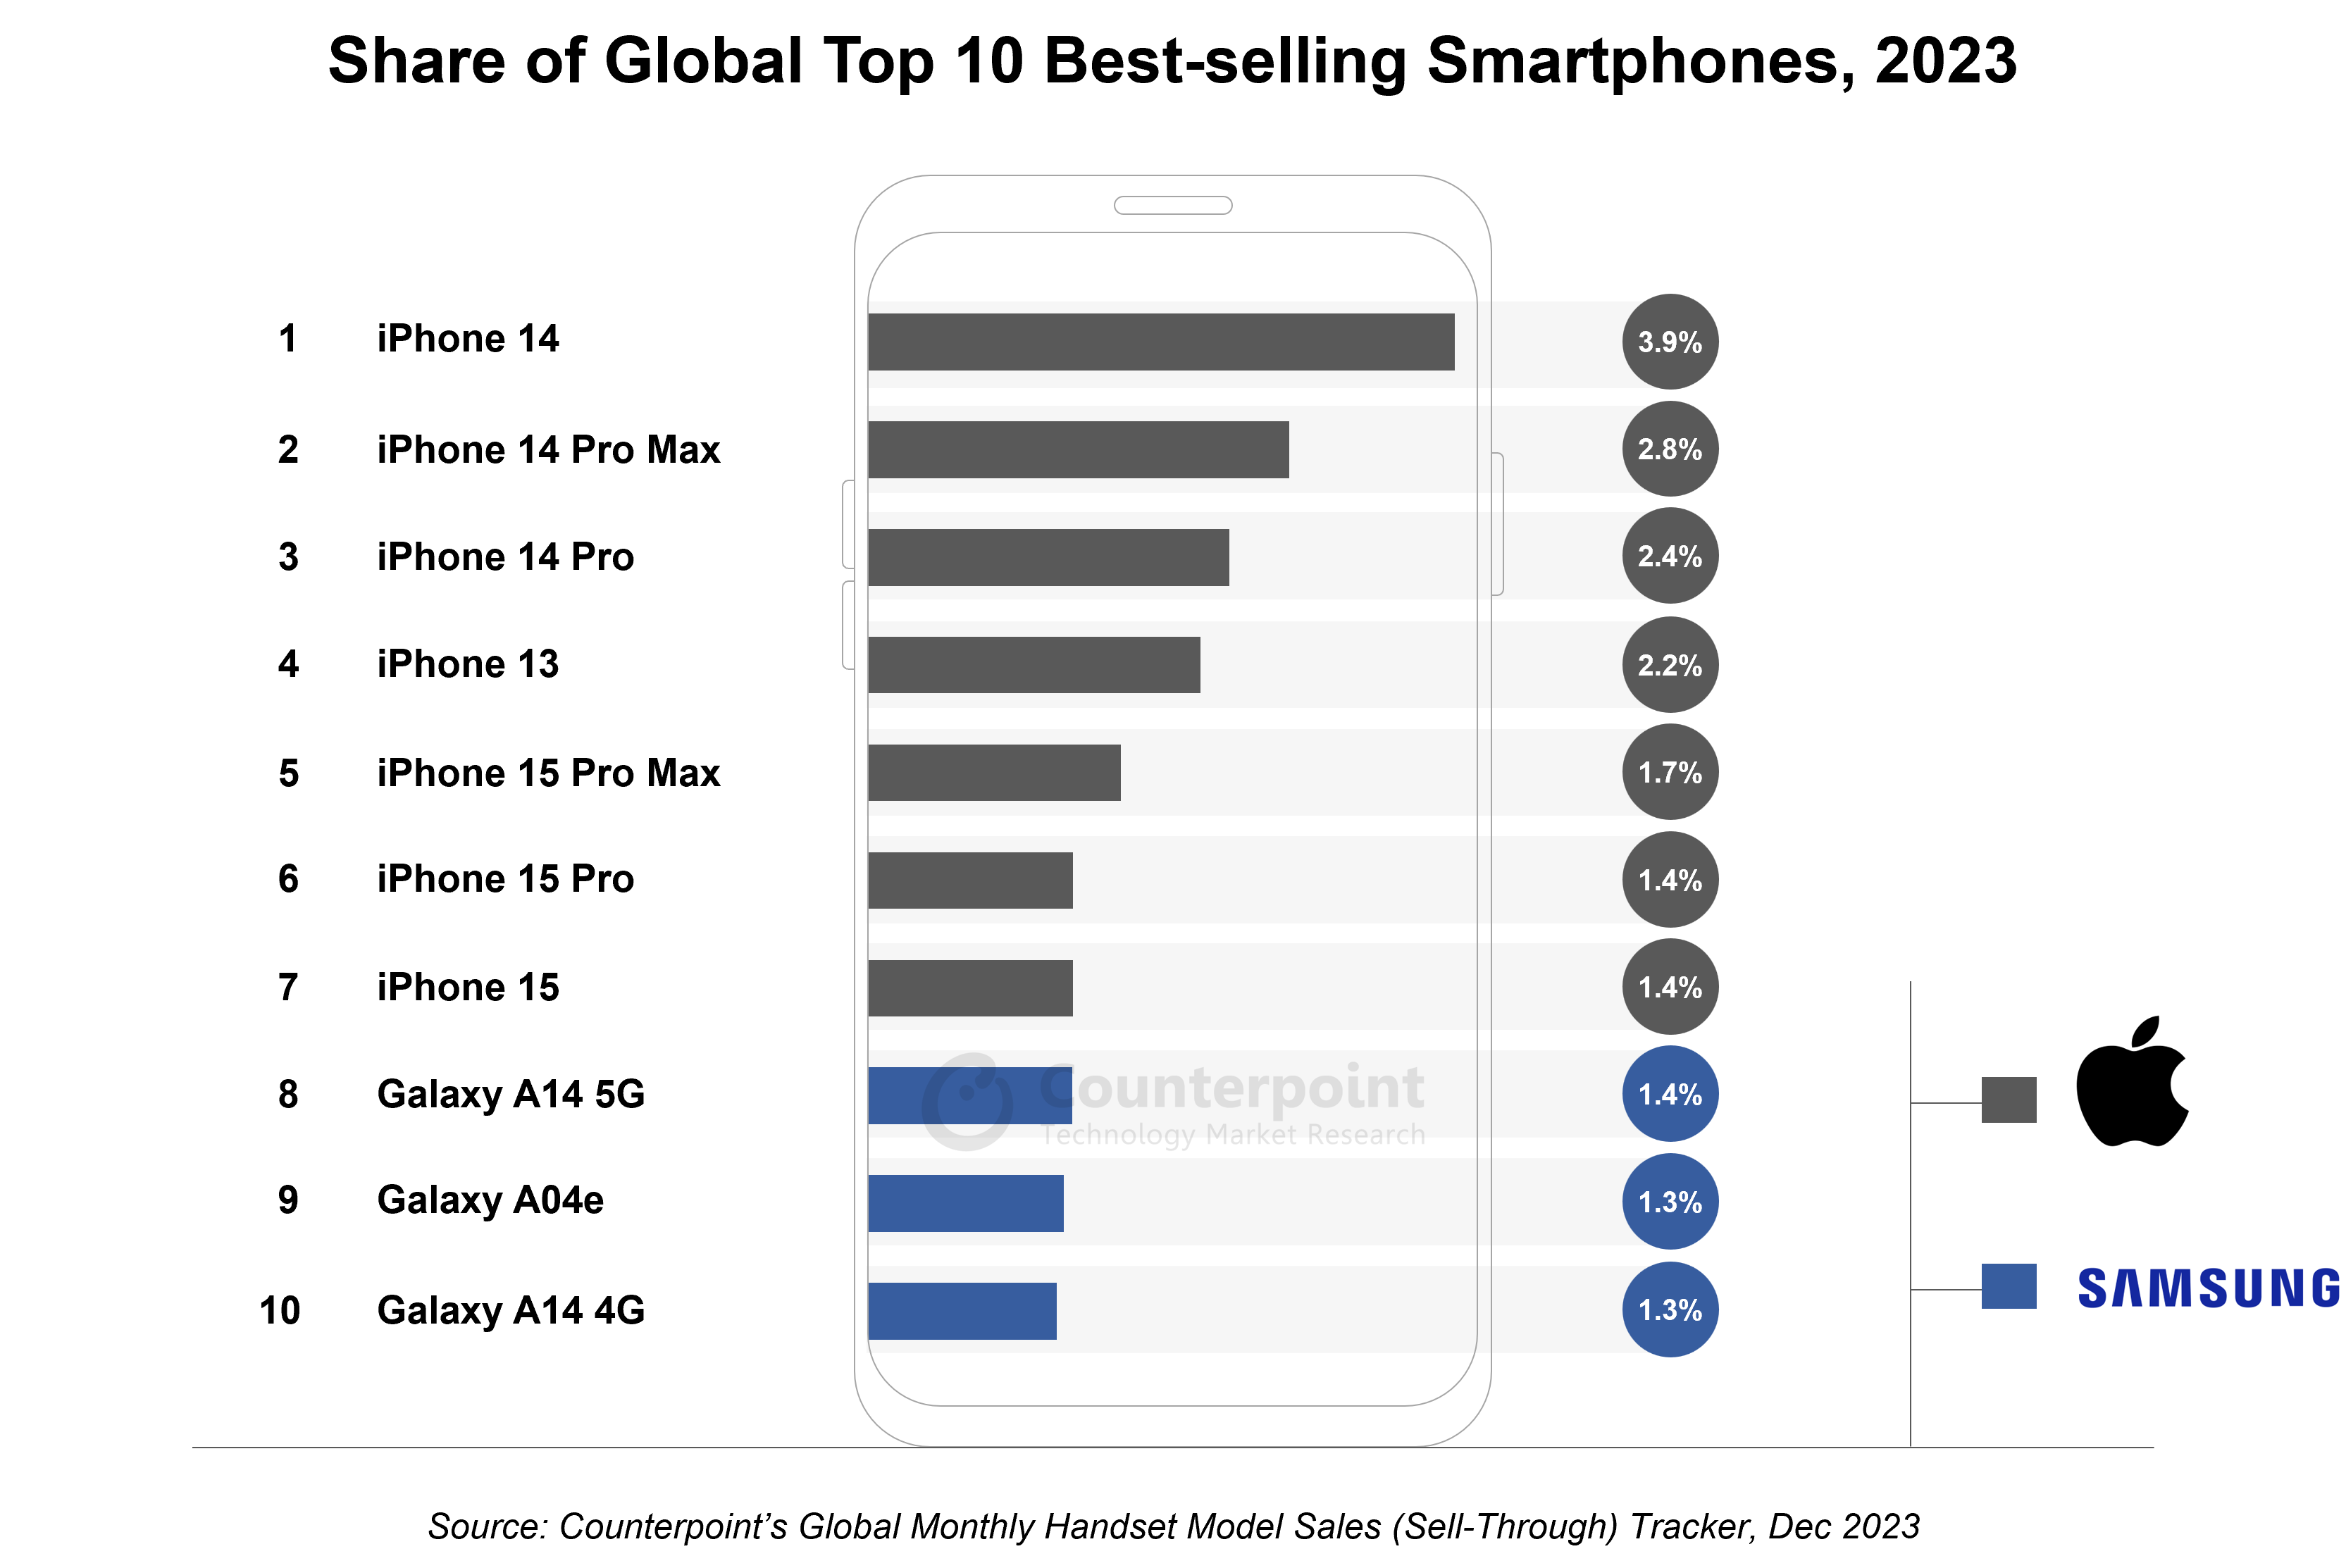 In a First, Apple Captures Top 7 Spots in Global List of Top 10 Best-selling Smartphones